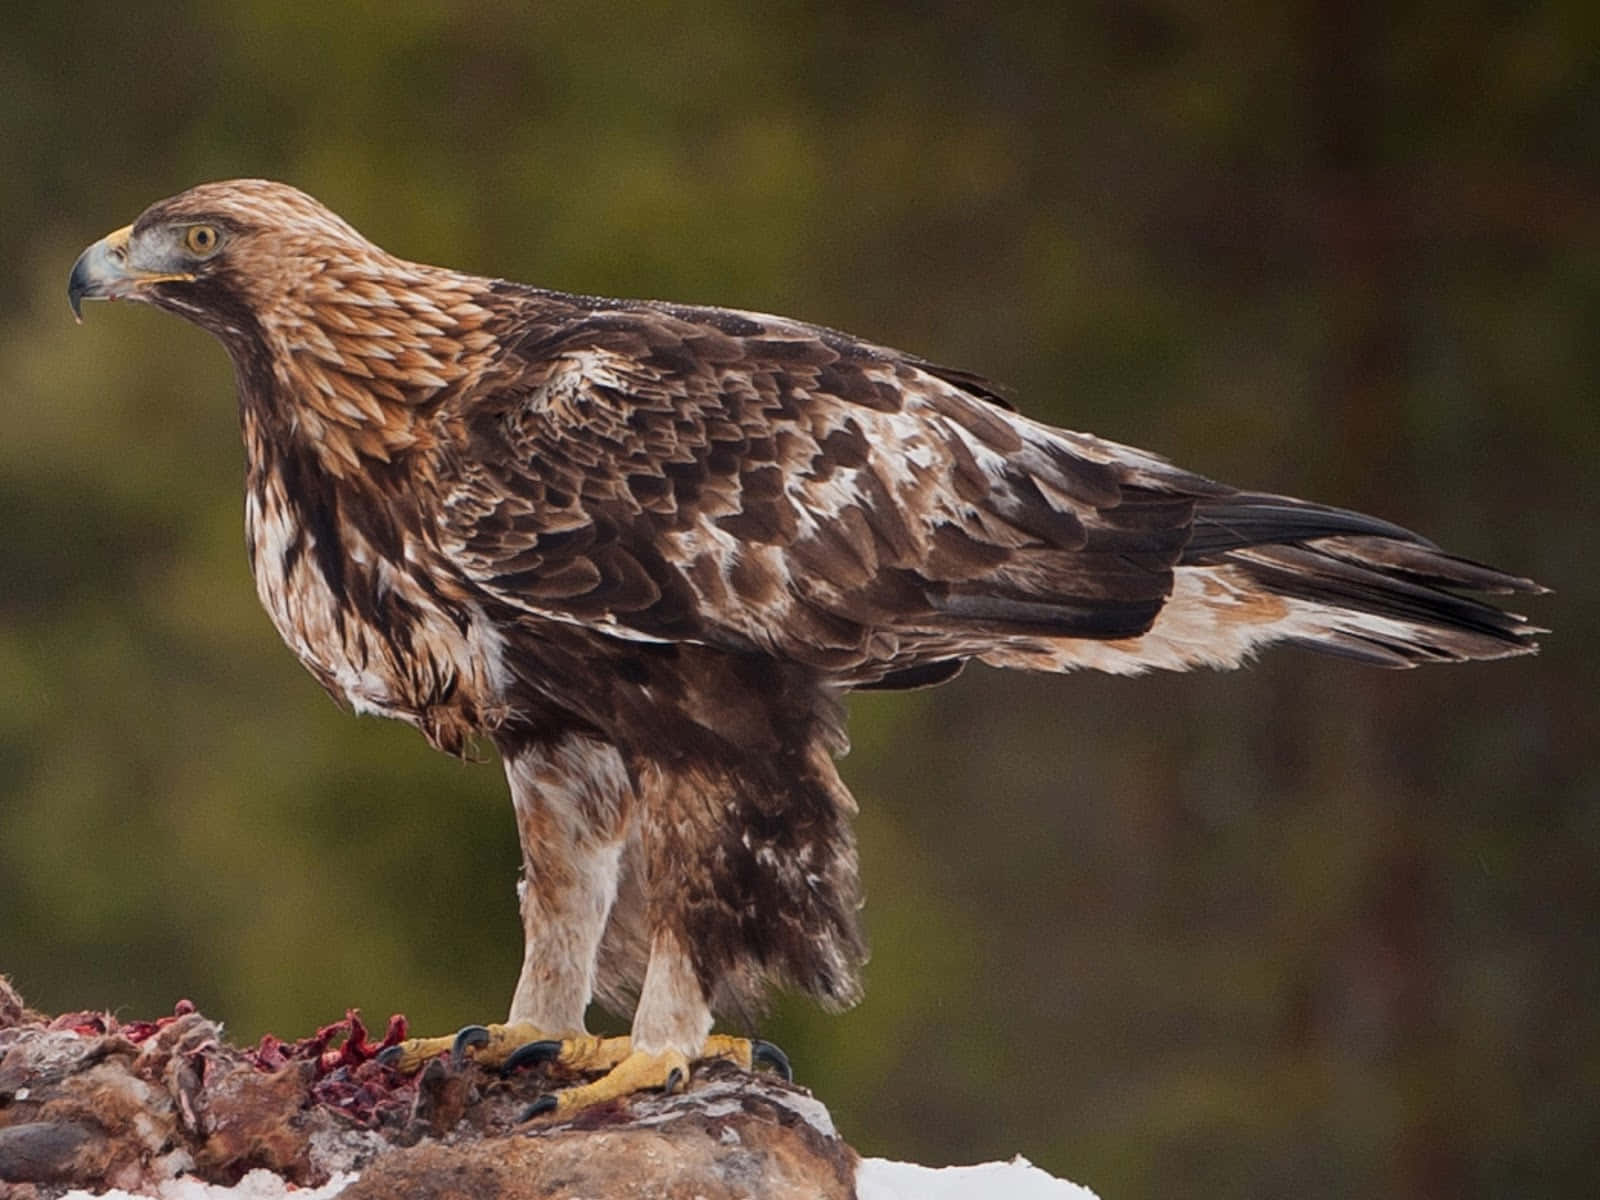 The Majesty of the Golden Eagle